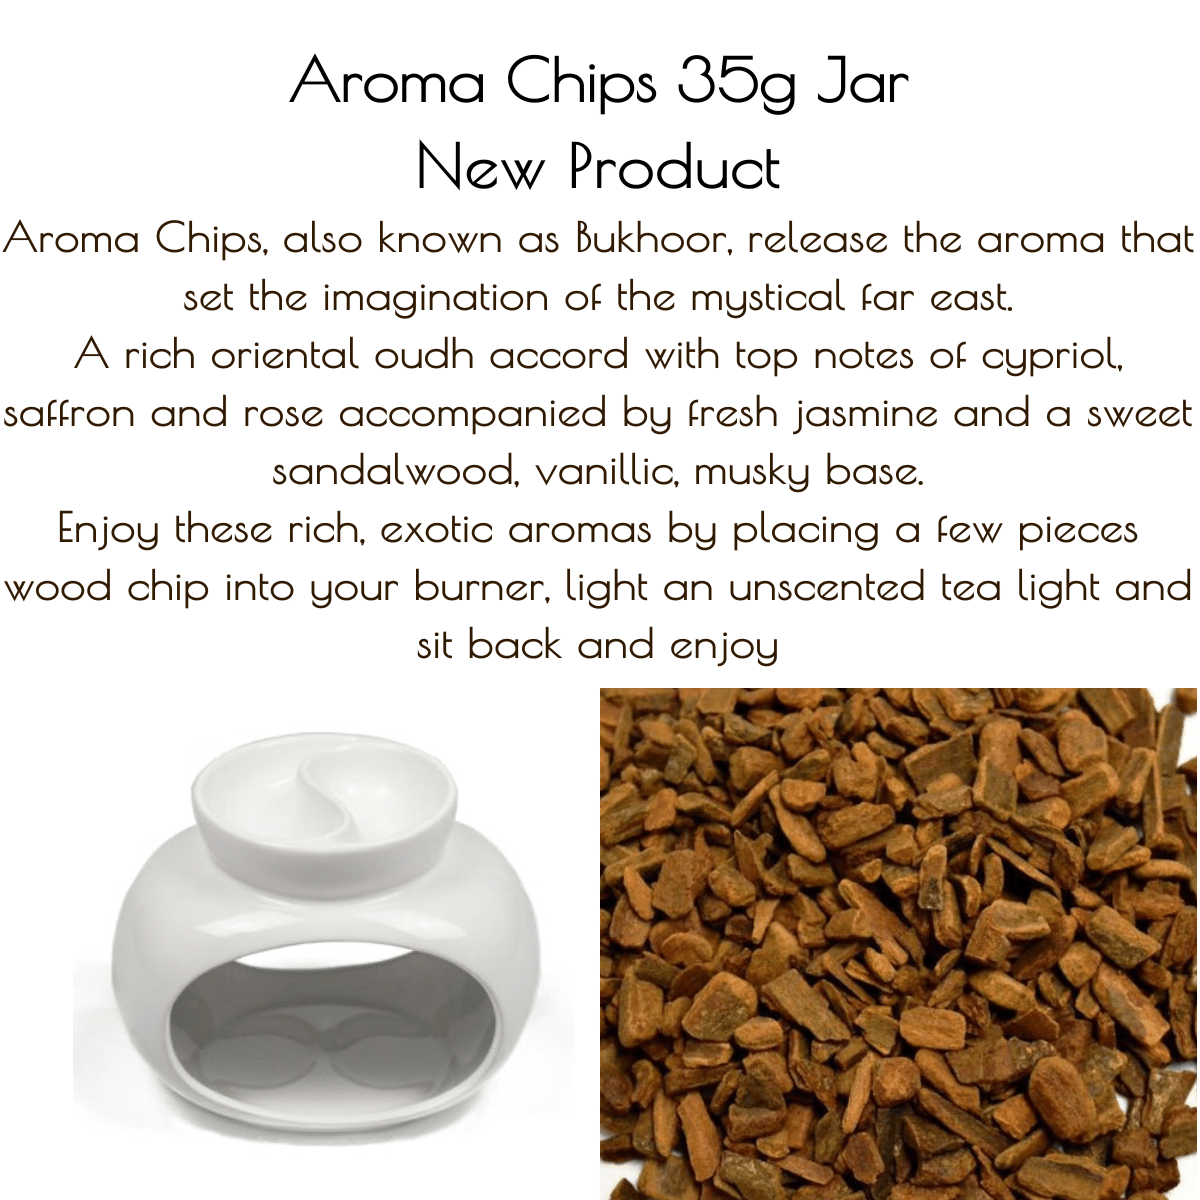 17DCCE55 888C 4466 A0DD BC1DE619ADBE Aroma Chips, also known as Bukhoor, release the aroma that set the imagination of the mystical far east. Enjoy these rich, exotic aromas by placing a few pieces wood chip into your burner, light an unscented tea light and sit back and enjoy. You can also burn the resin chips using charcoal in a net burner if you truly want to create an authentic far east experience. Material: Bakhoor are wood chips that have been soaked in perfume oil and are mixed with other (natural) ingredients. <h6 class="page-title"><span class="base" data-ui-id="page-title-wrapper">Oud Paleo...</span>A rich oriental oudh accord with top notes of cypriol, saffron and rose accompanied by fresh jasmine and a sweet sandalwood, vanillic, musky base.</h6> <h6 class="page-title"><span class="base" data-ui-id="page-title-wrapper">Oud Wood & Dark Vanilla...A sensual woody fragrance opening with spicy top notes of pink and black pepper, cardamon, leading to a rich heart of wood, oudh, cedarwood, leather, sandalwood with the earthiness of patchouli and vetiver. All resting on a sensuous base of amber, oak moss, tonka, vanilla & powdery musk.</span></h6>